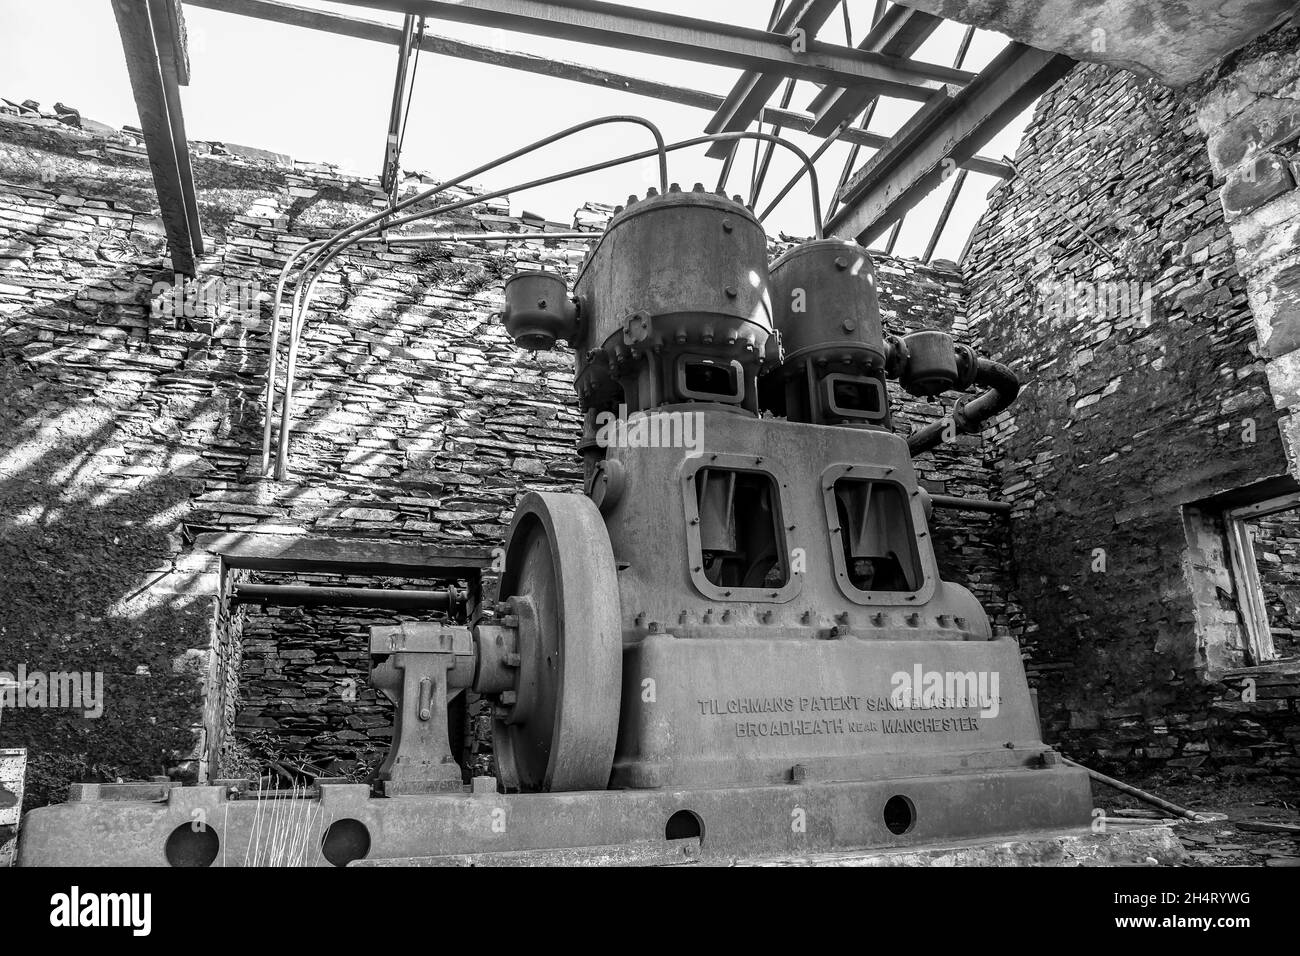 Monochrome view of old machinery in derelict, disused slate quarry building, North Wales, UK. Stock Photo